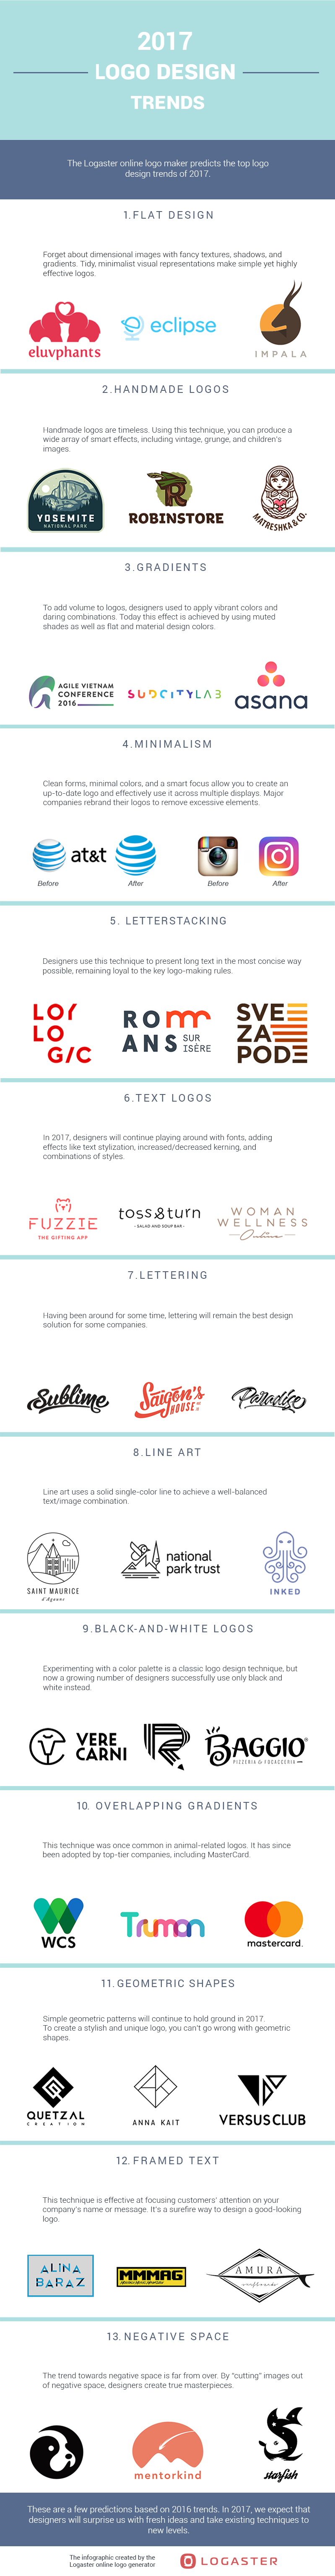 logo-design-trends-infographic.png